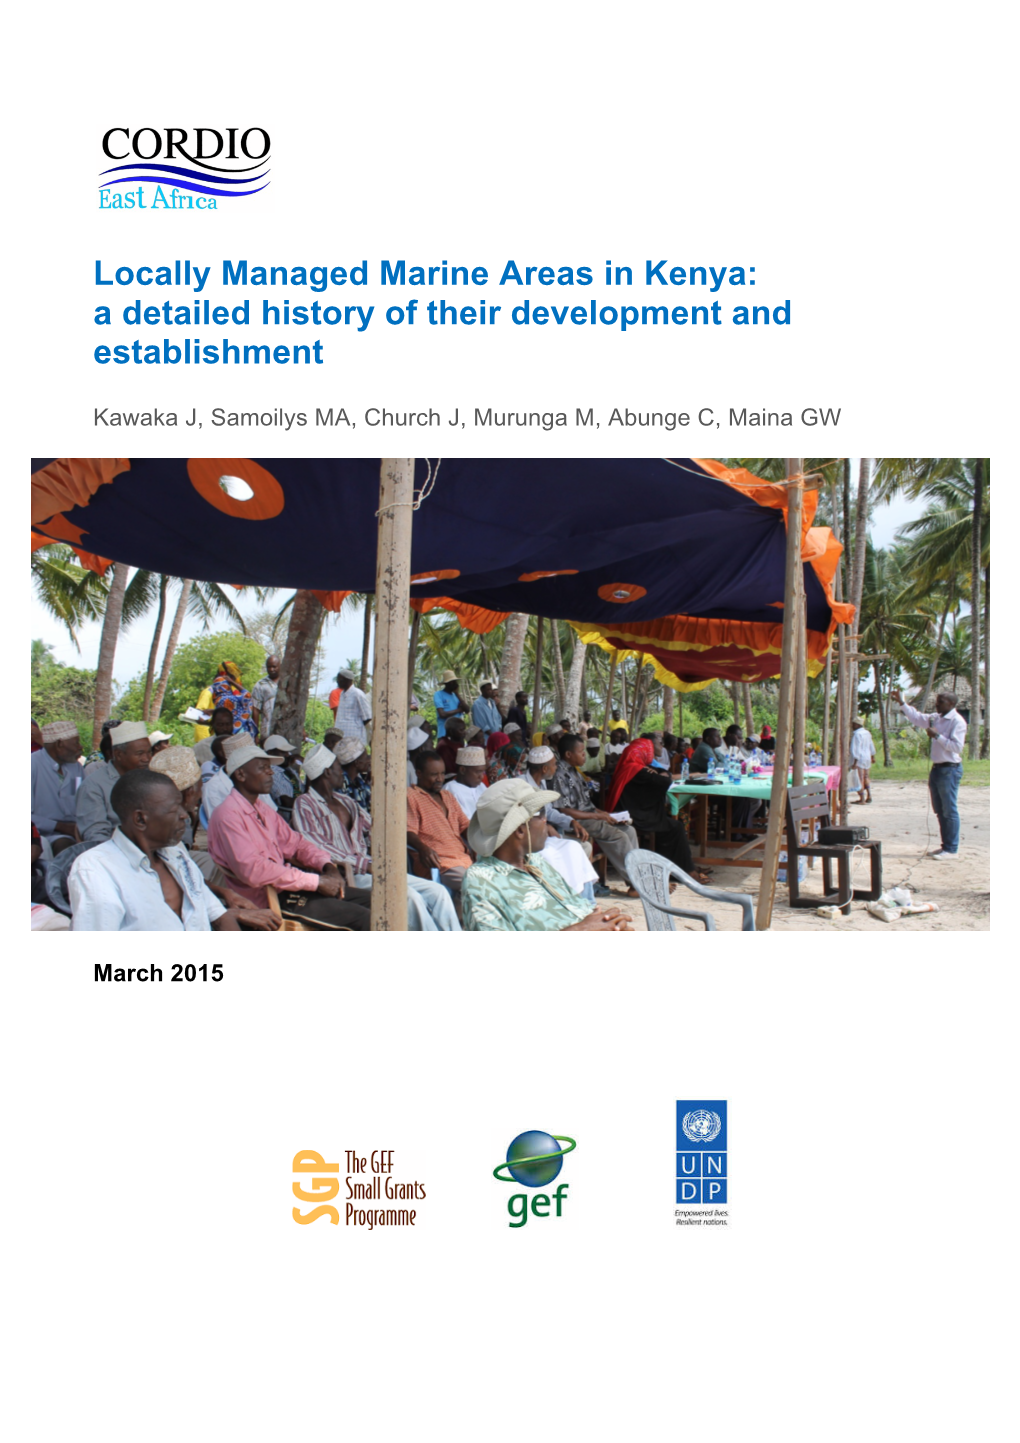 Locally Managed Marine Areas in Kenya: a Detailed History of Their Development and Establishment